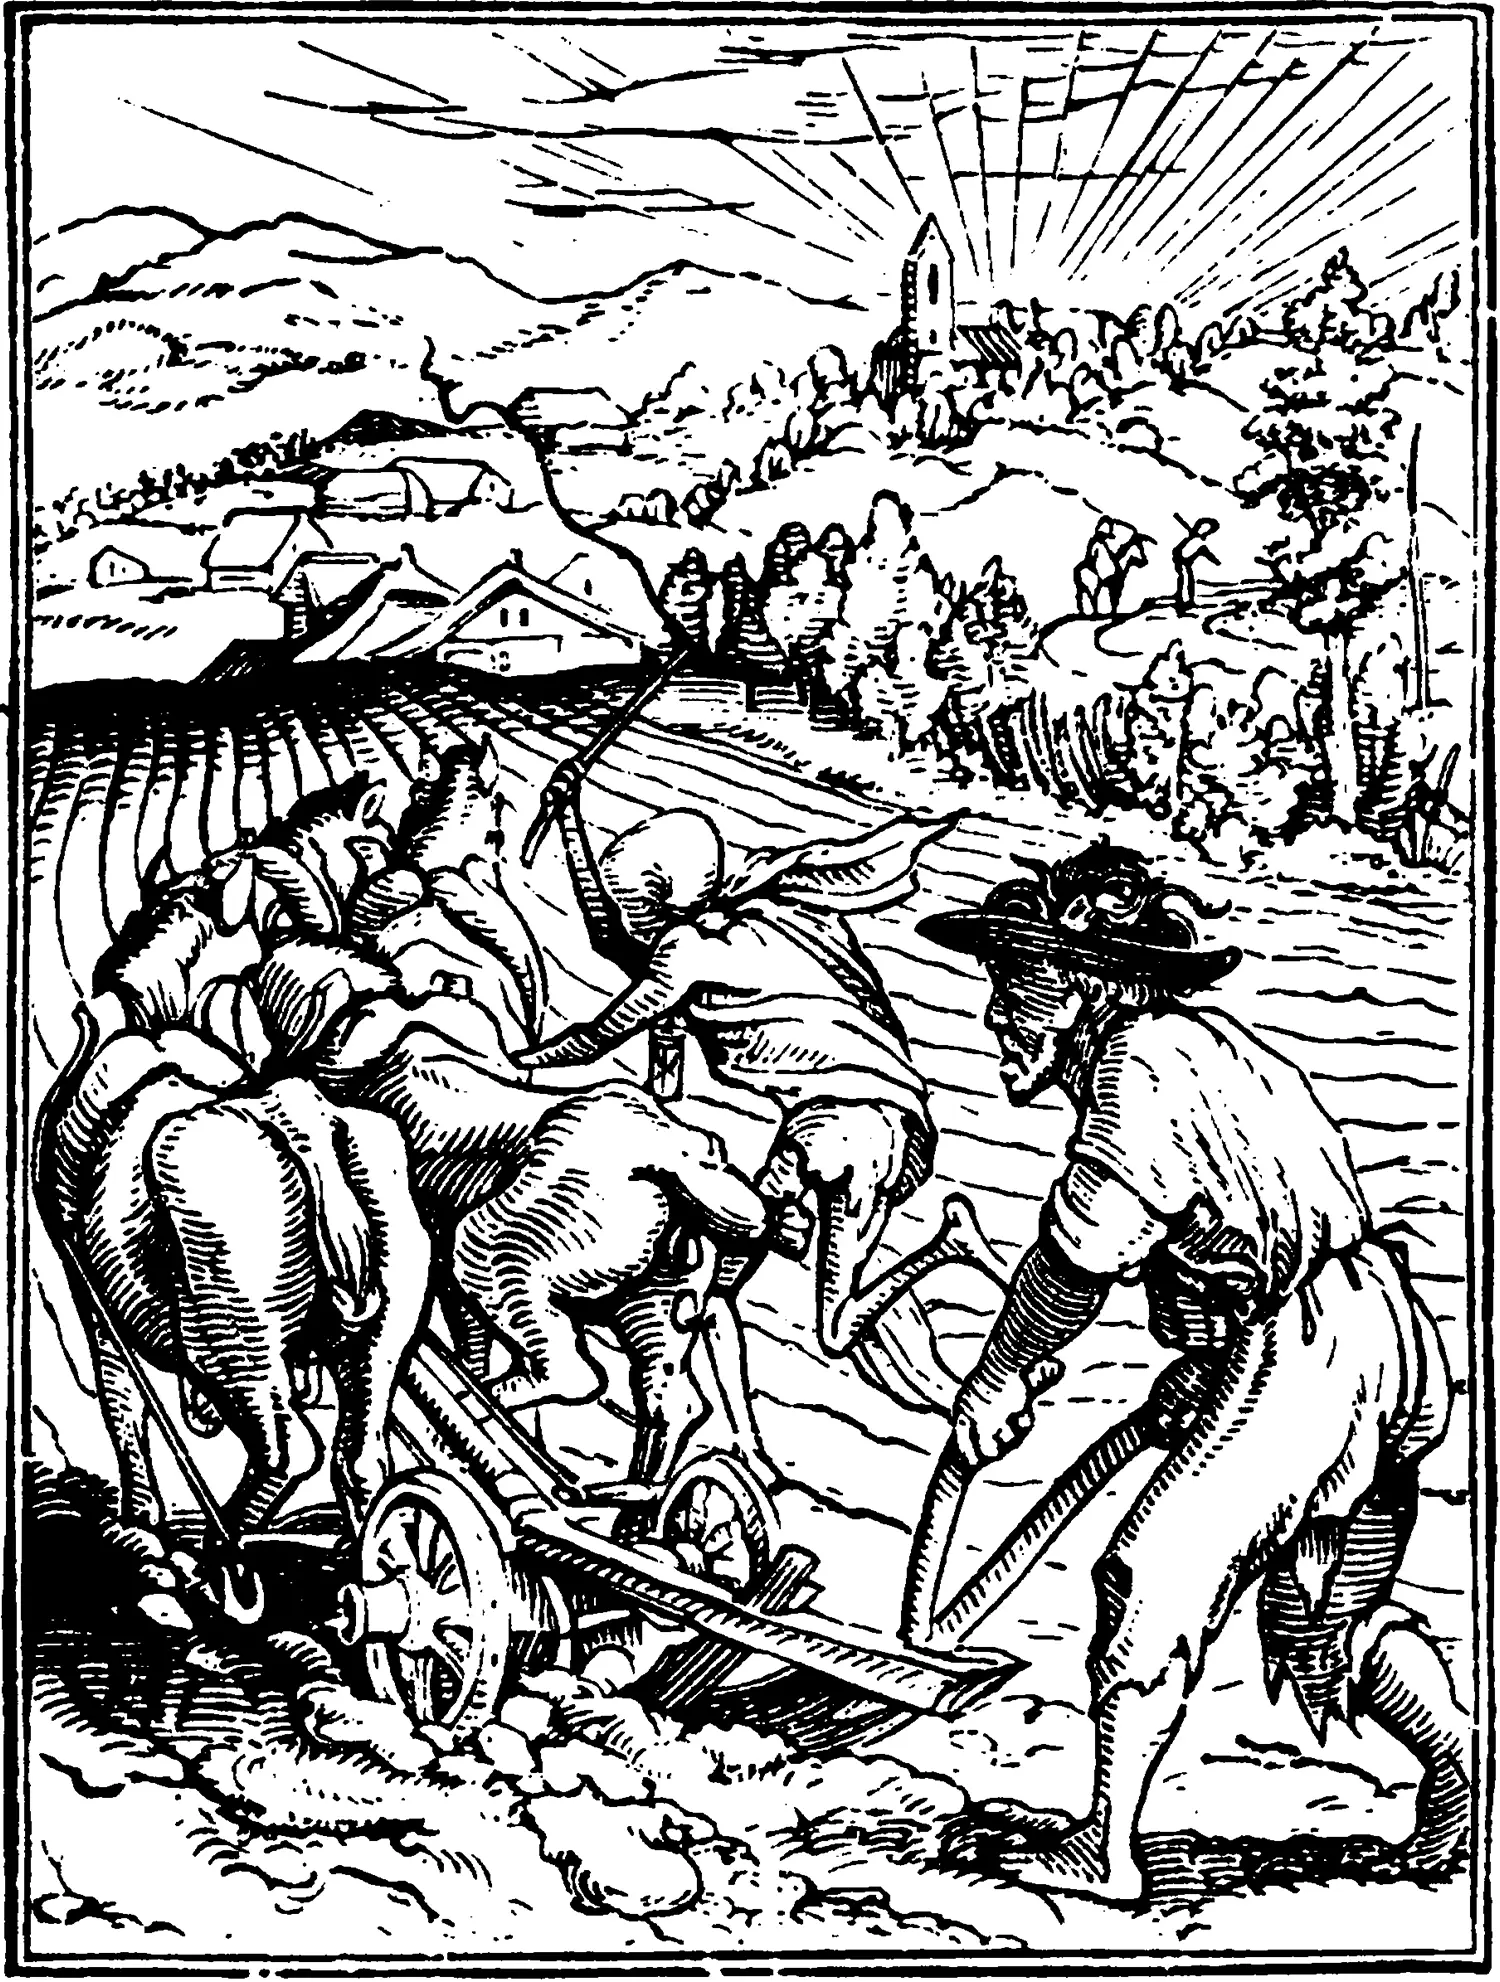 A man plows a field with a horse-drawn plow. A skeleton runs alongside, whipping the horses.